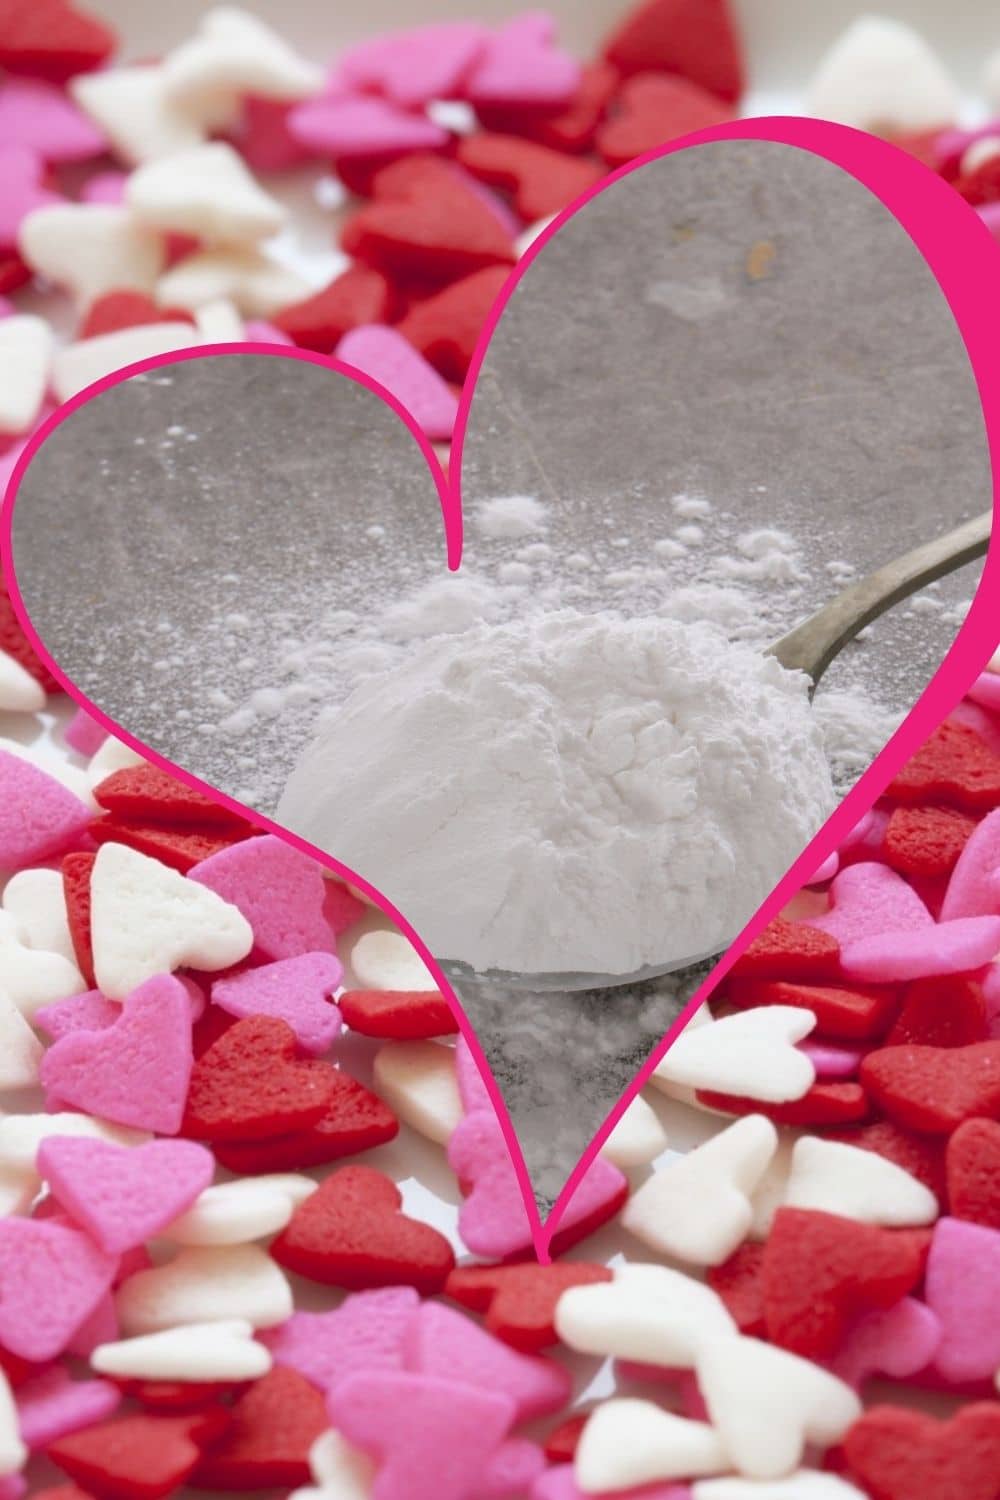 confectioners sugar for a simple cake for Valentines Day